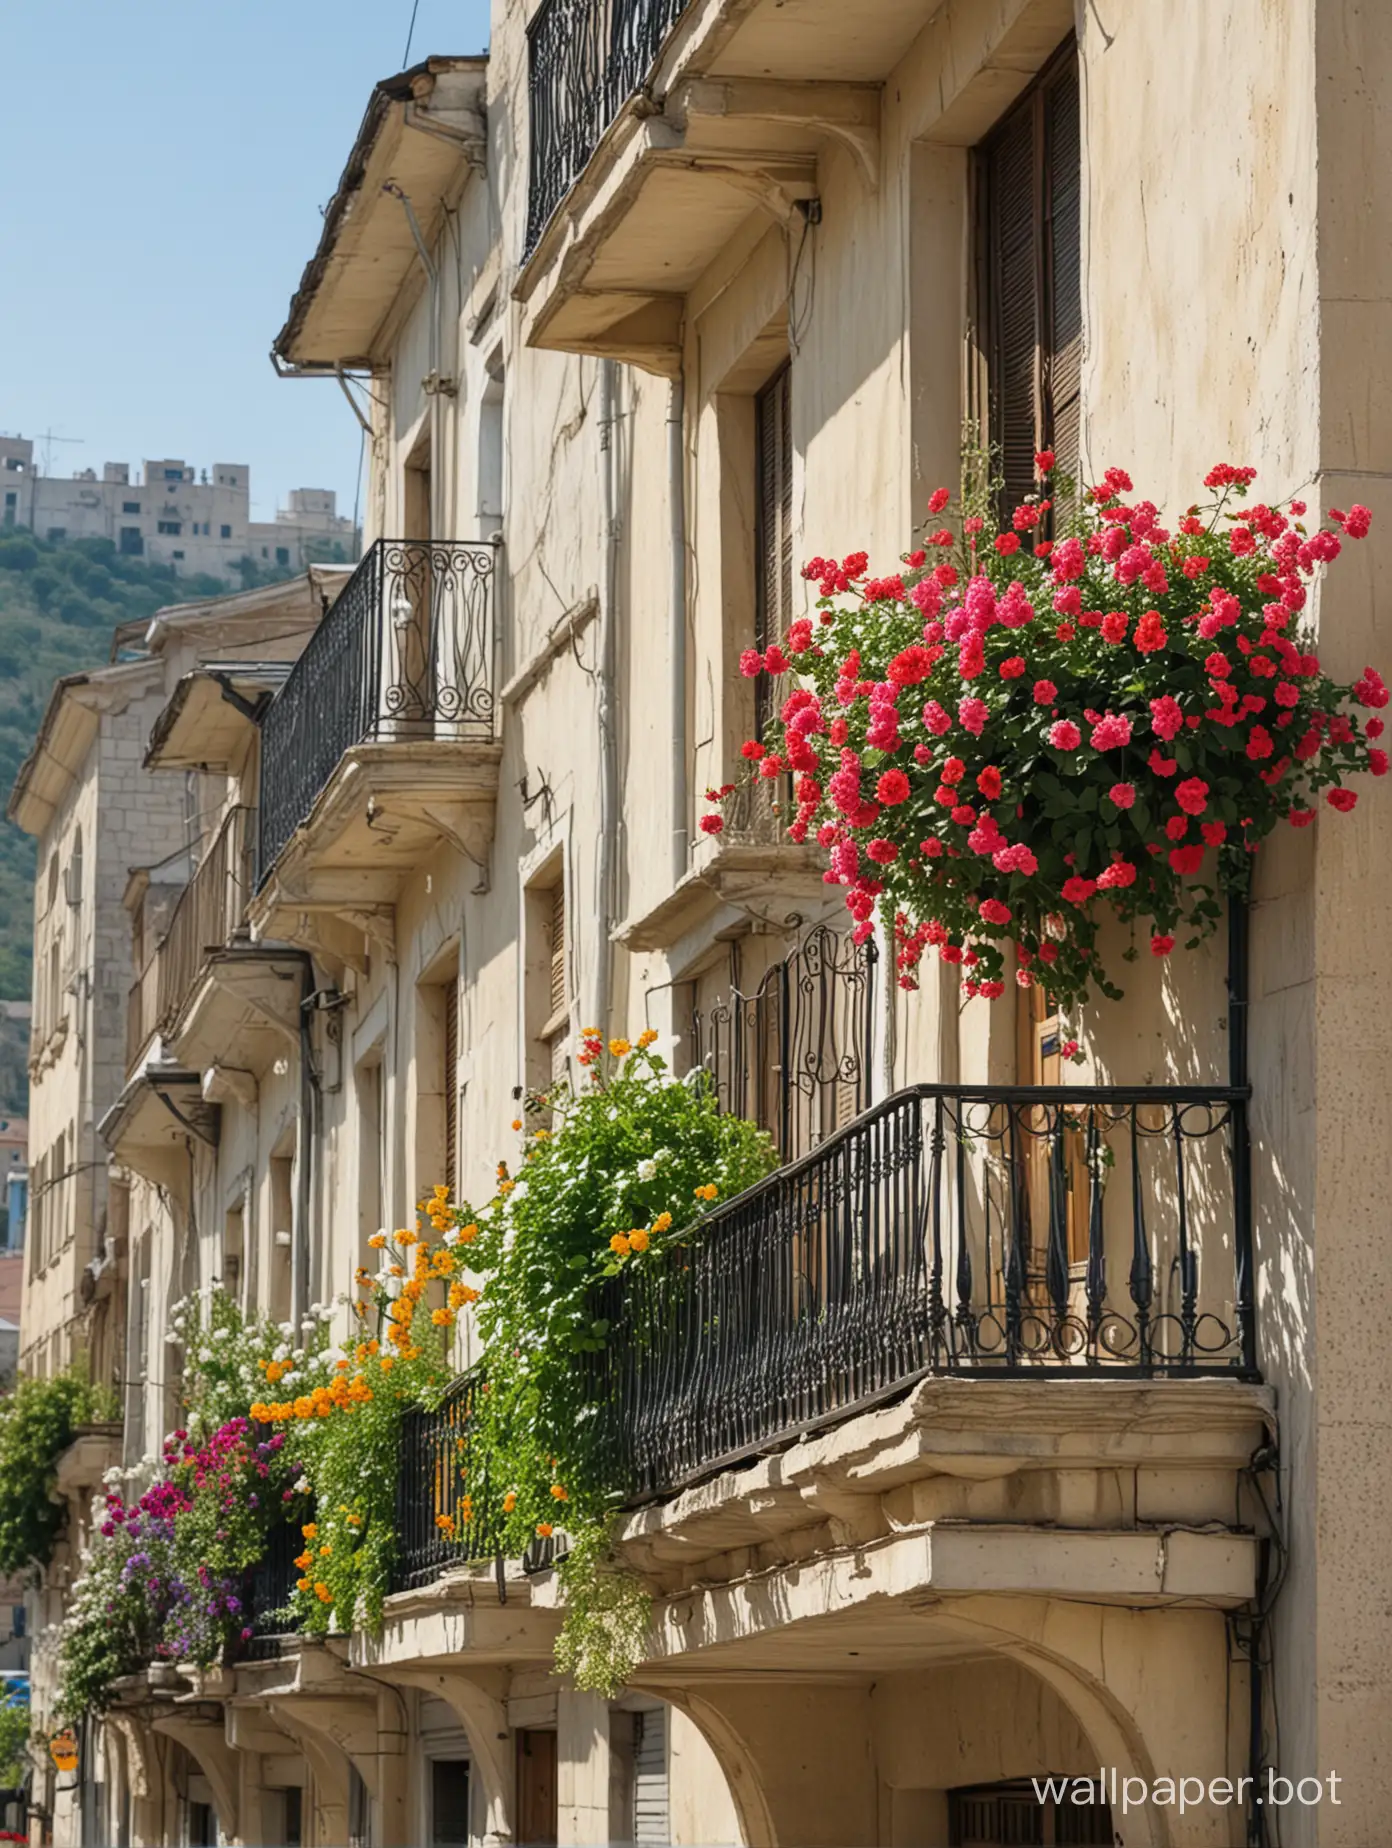 Charming-Old-City-Street-in-Crimea-with-Balcony-Flowers